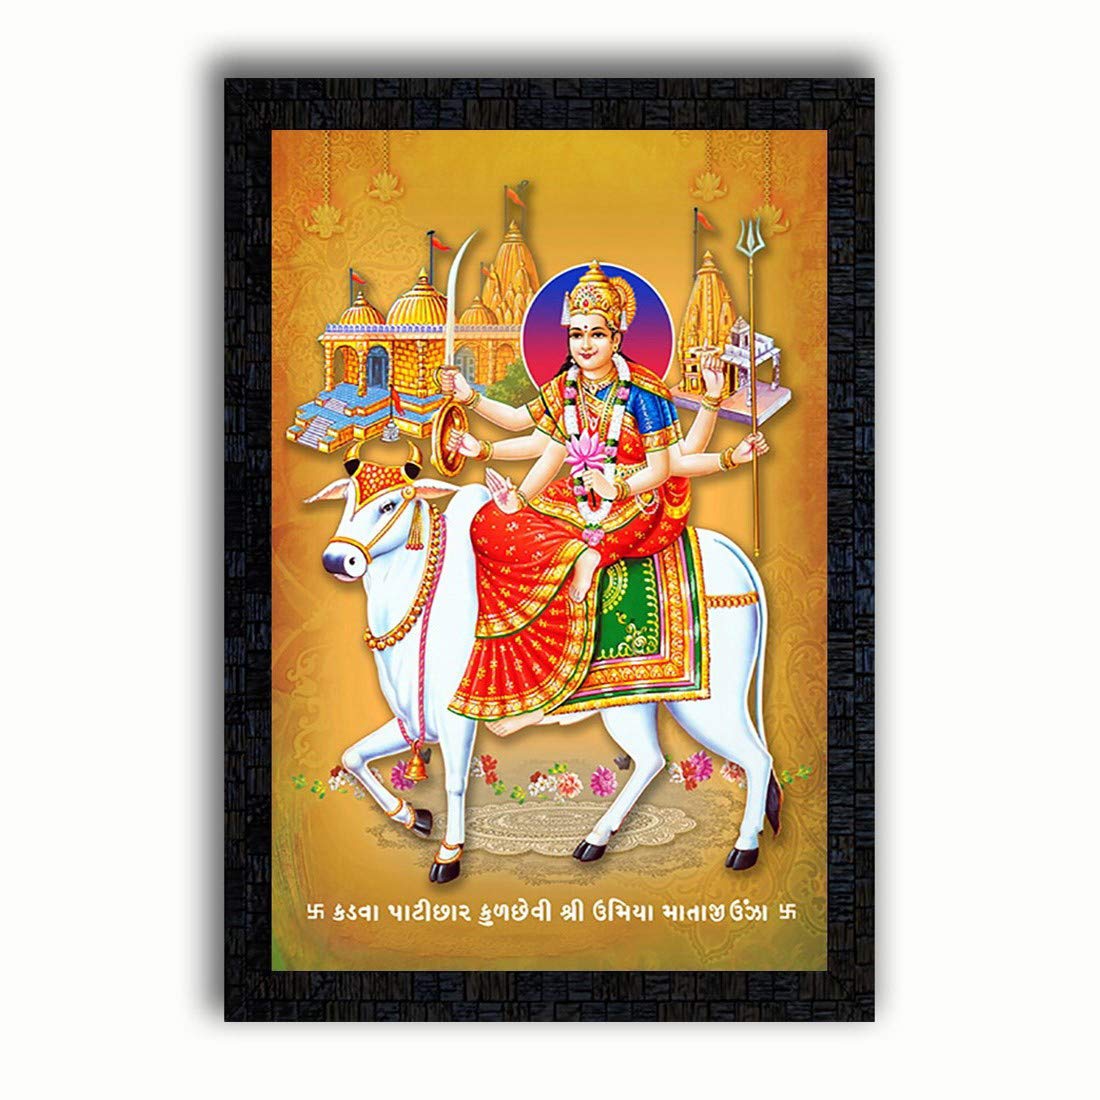 PNF umiya mataji unjha Religious Painting with Wooden Synthetic Frame (13.5x19 inch, Multicolour, Medium ), Amazon.in: Home & Kitchen